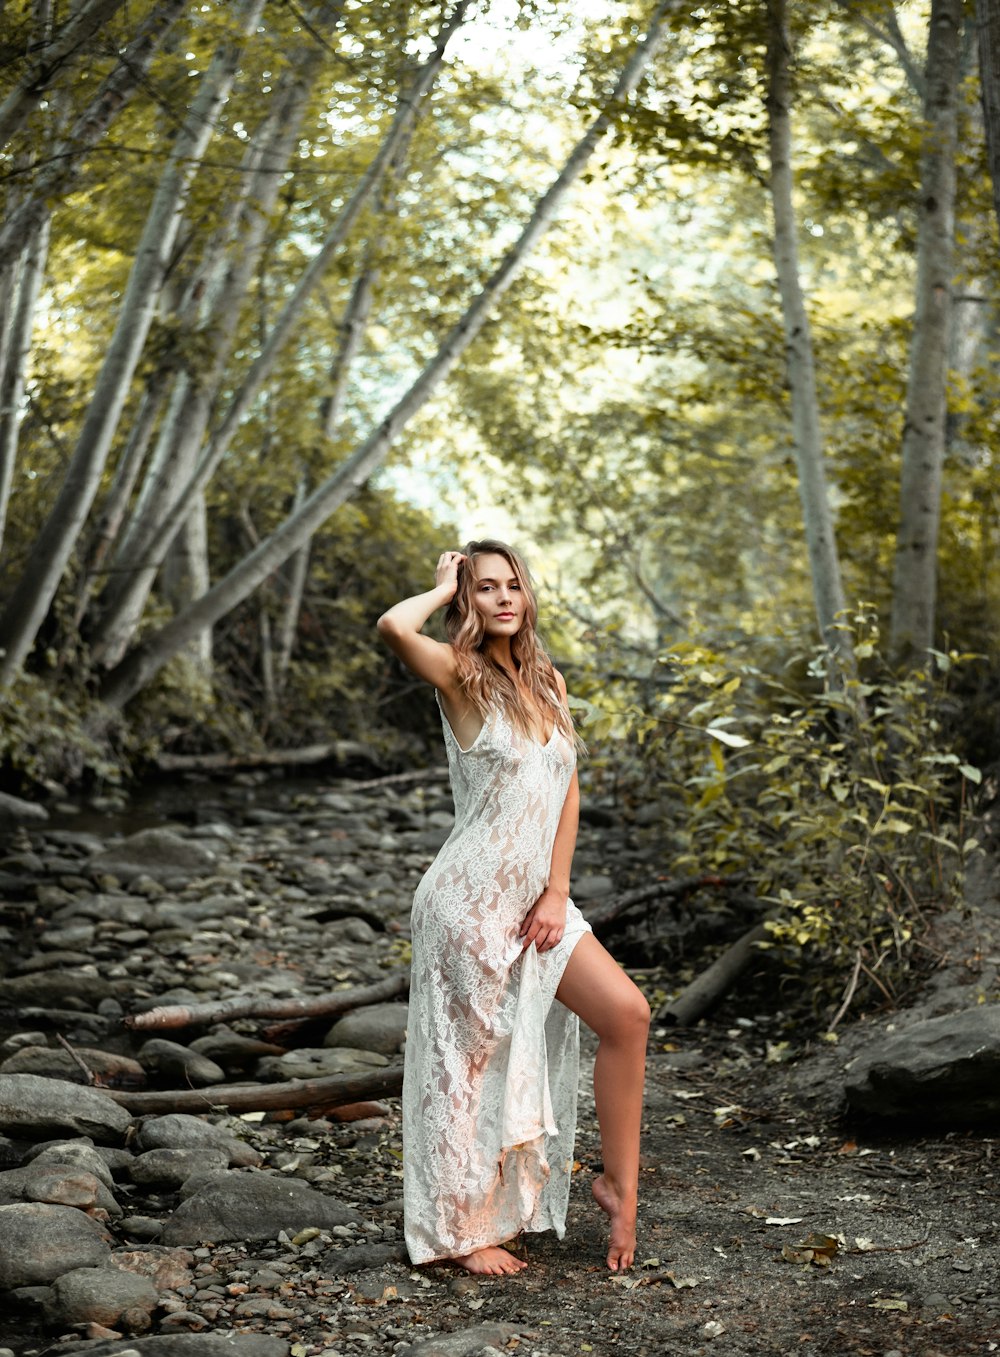 woman in white floral slit dress standing near trees